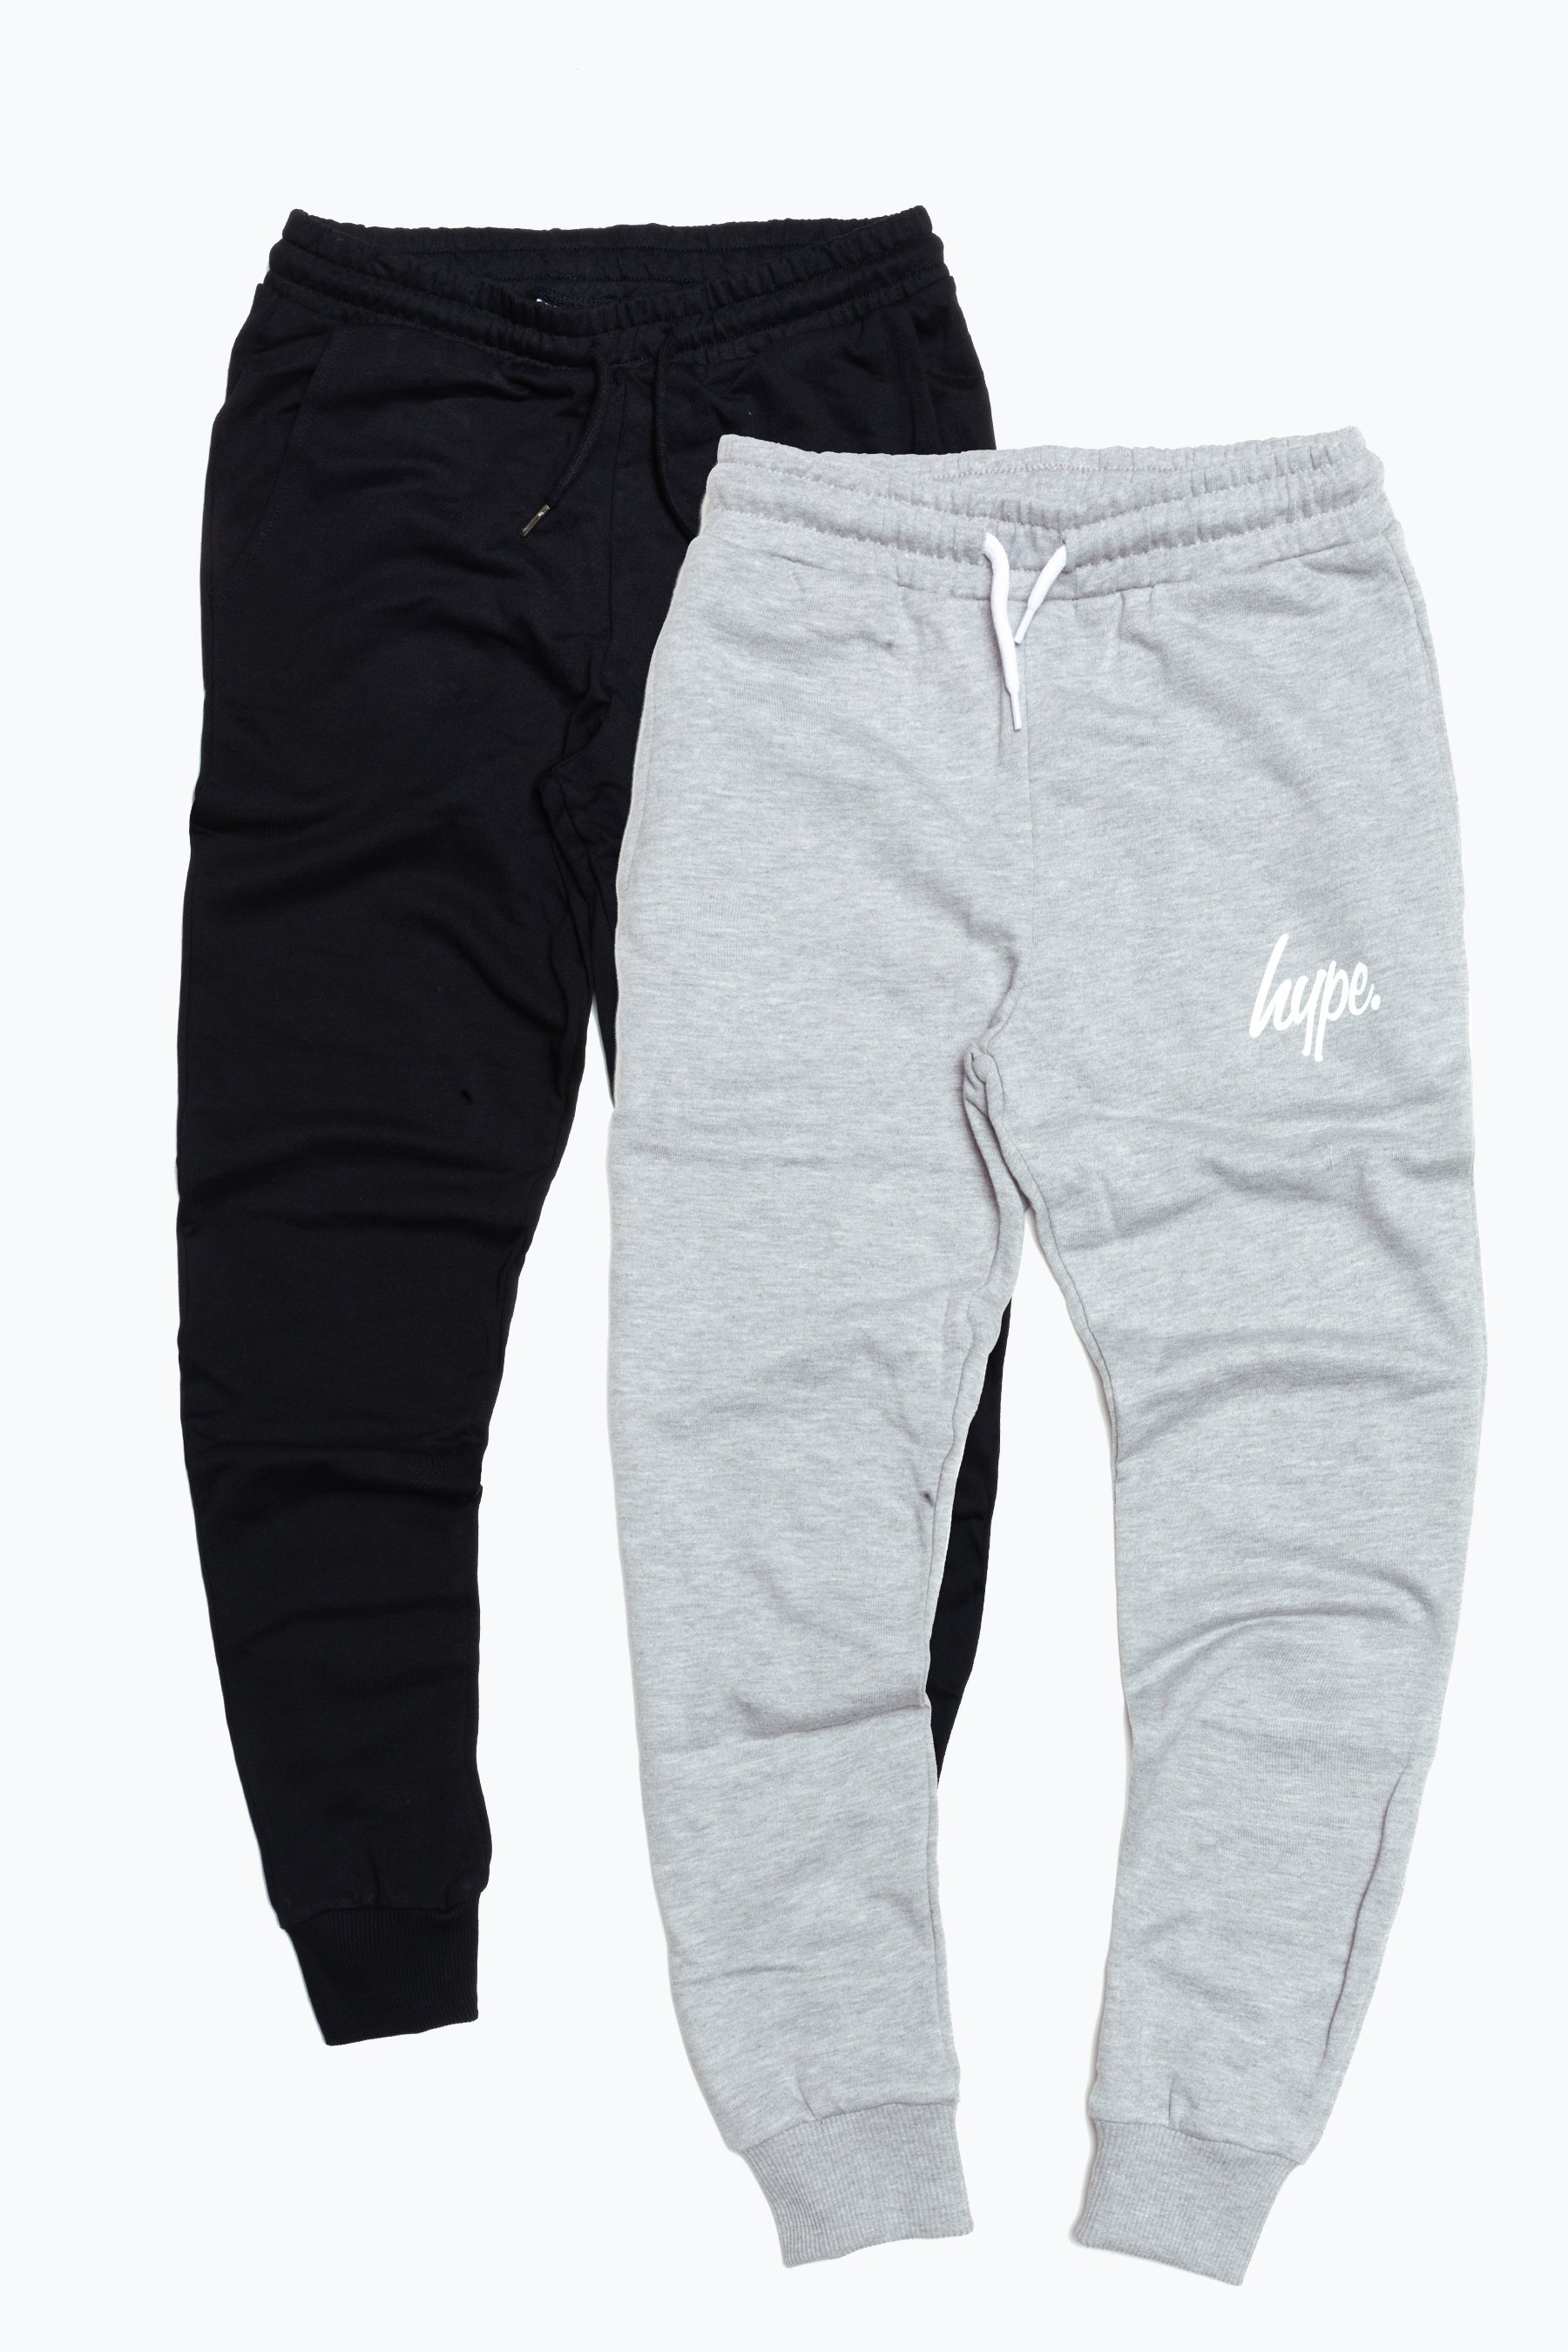 Hype 2 Pack Kids Joggers In Black & Grey | Size 13